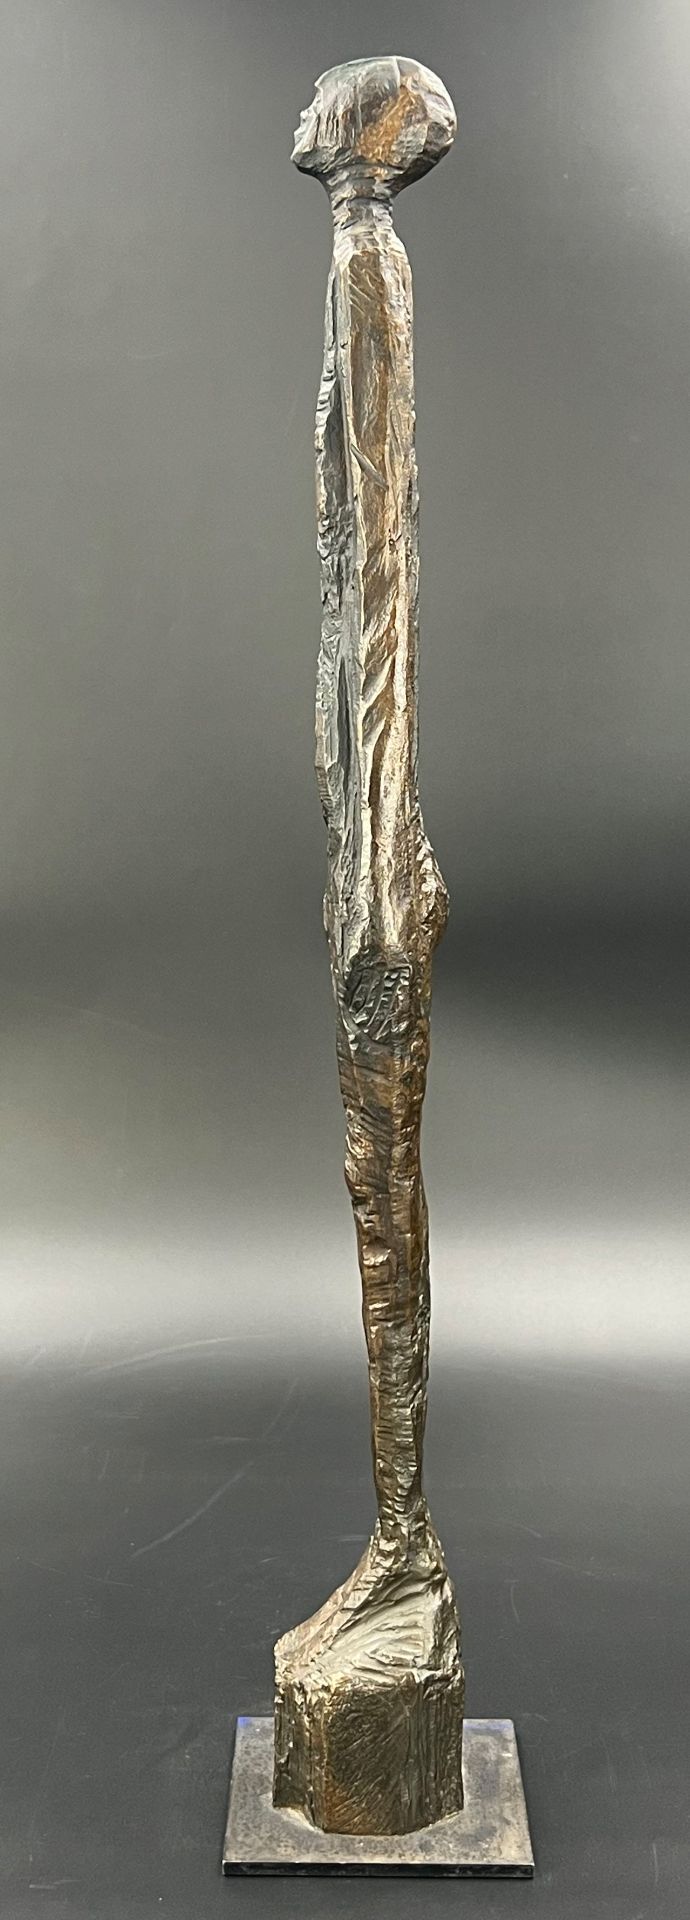 Walter SCHEMBS (1956). Bronze. "Small stele". - Image 3 of 10